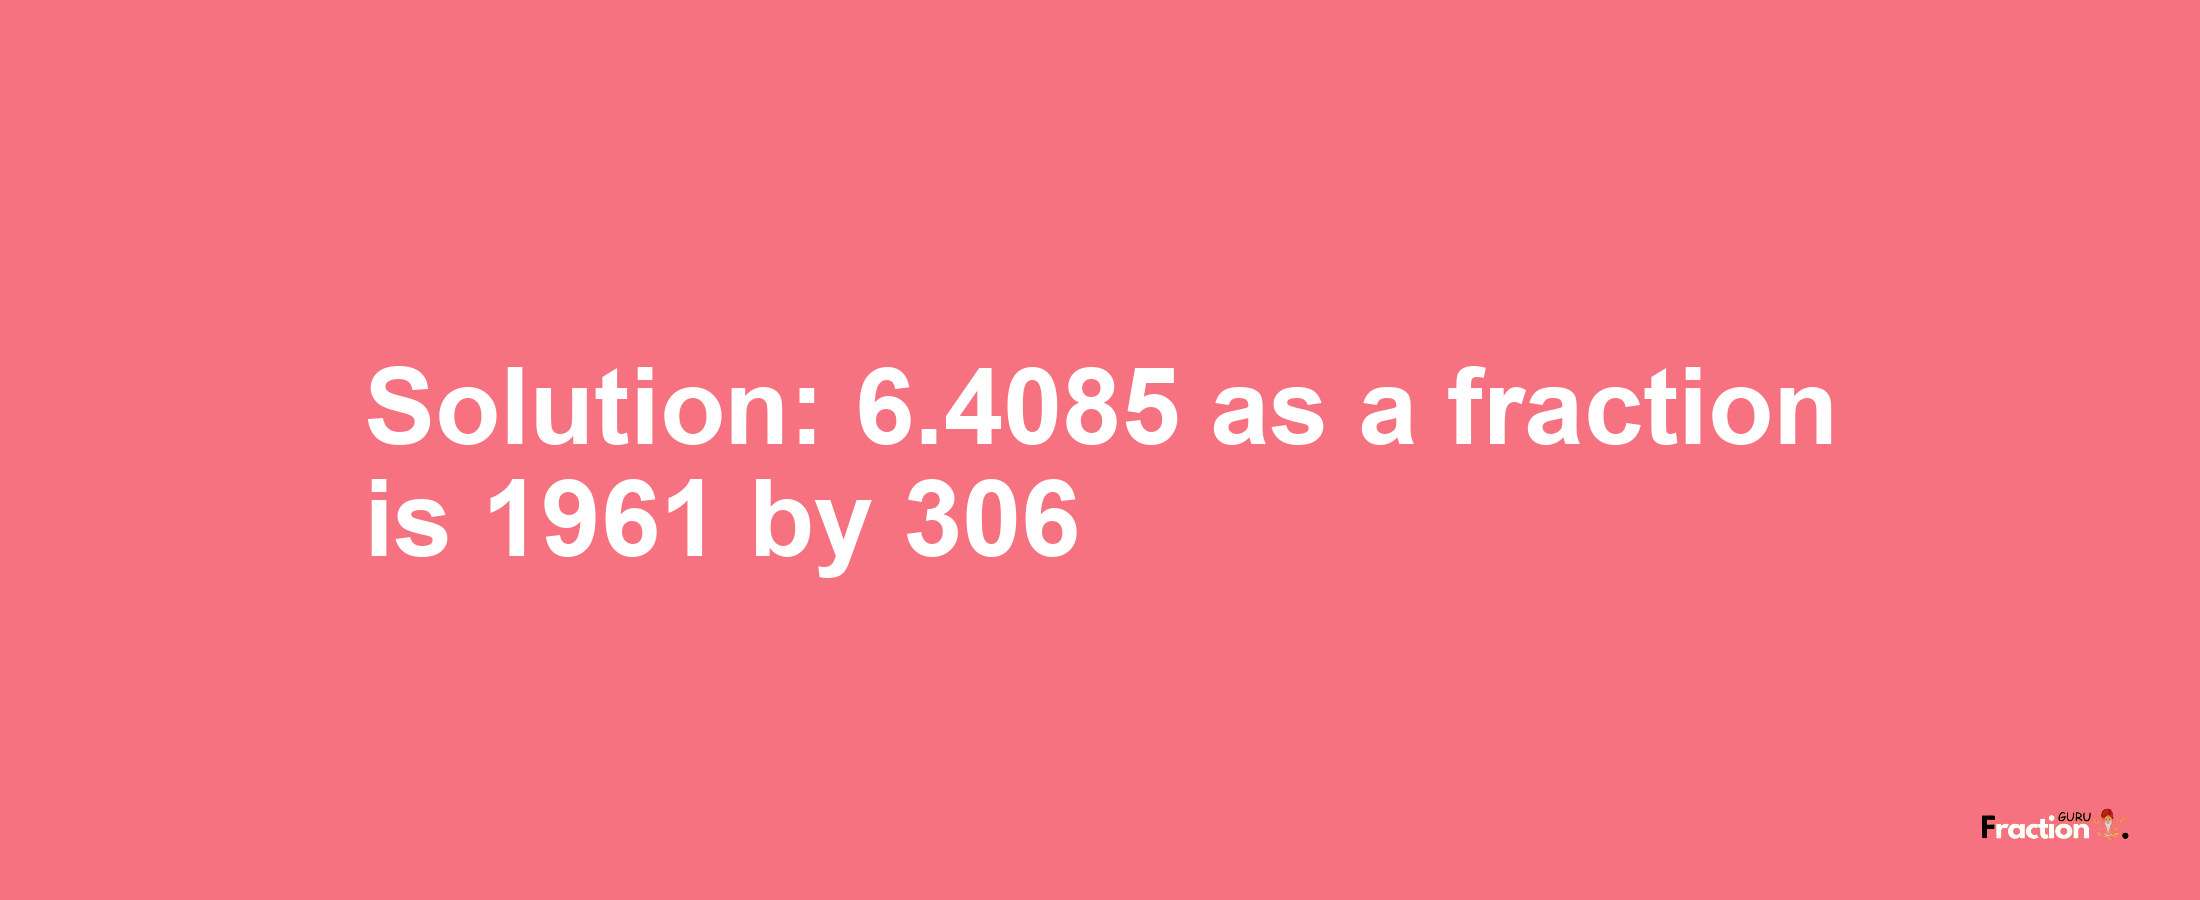 Solution:6.4085 as a fraction is 1961/306